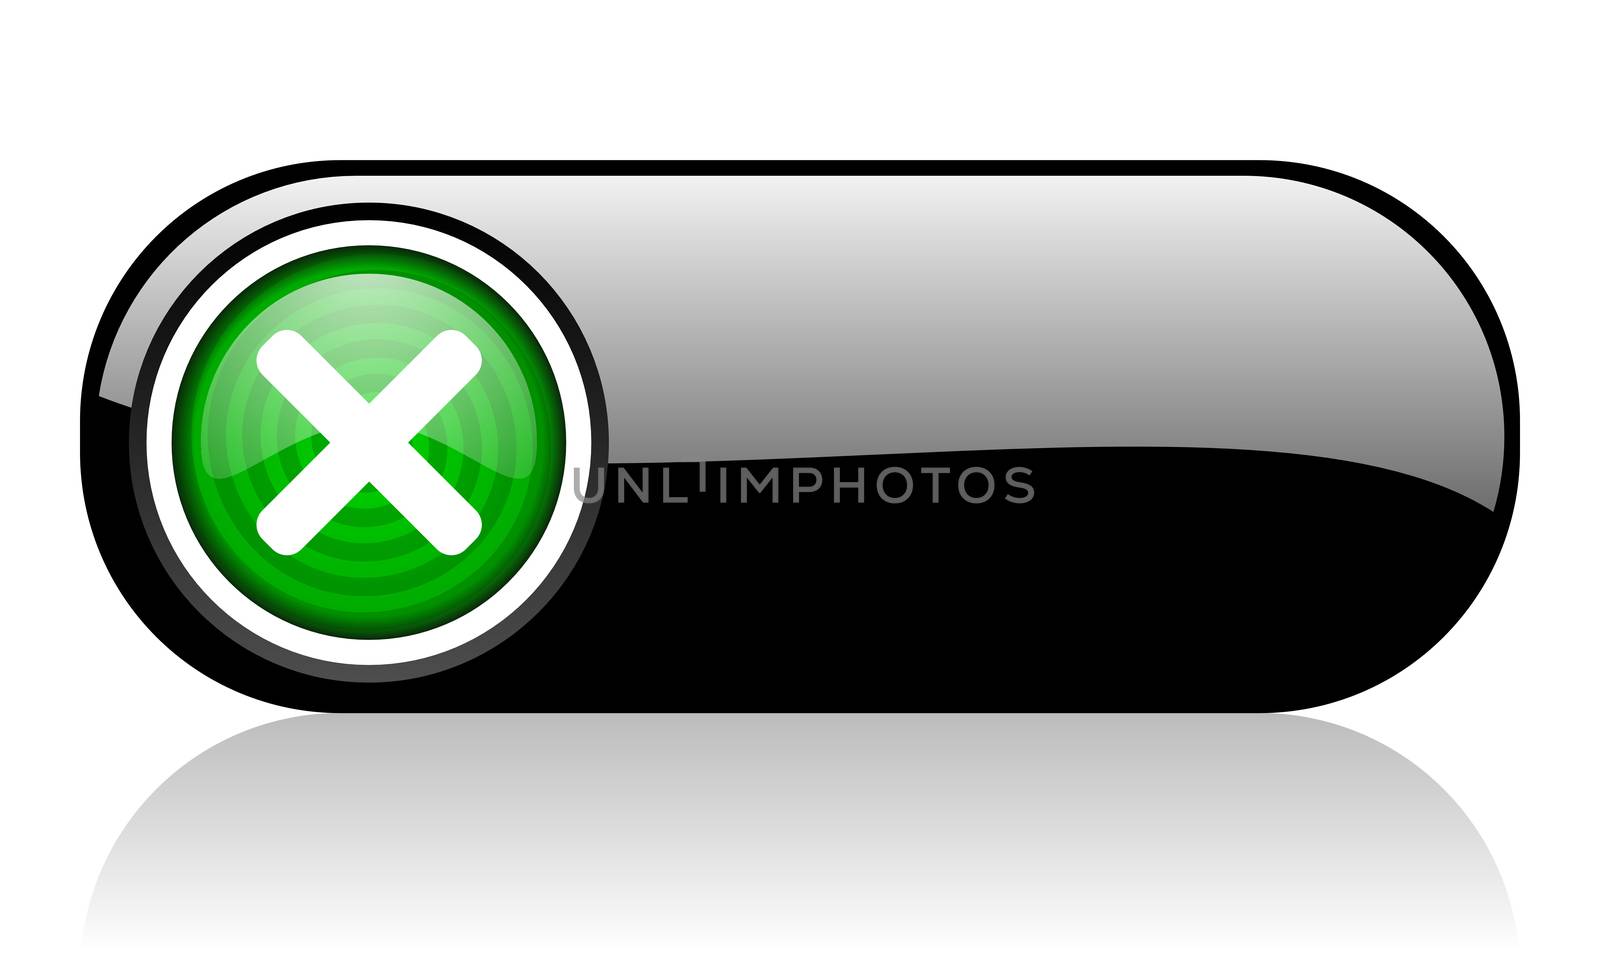 cancel black and green web icon on white background by alexwhite